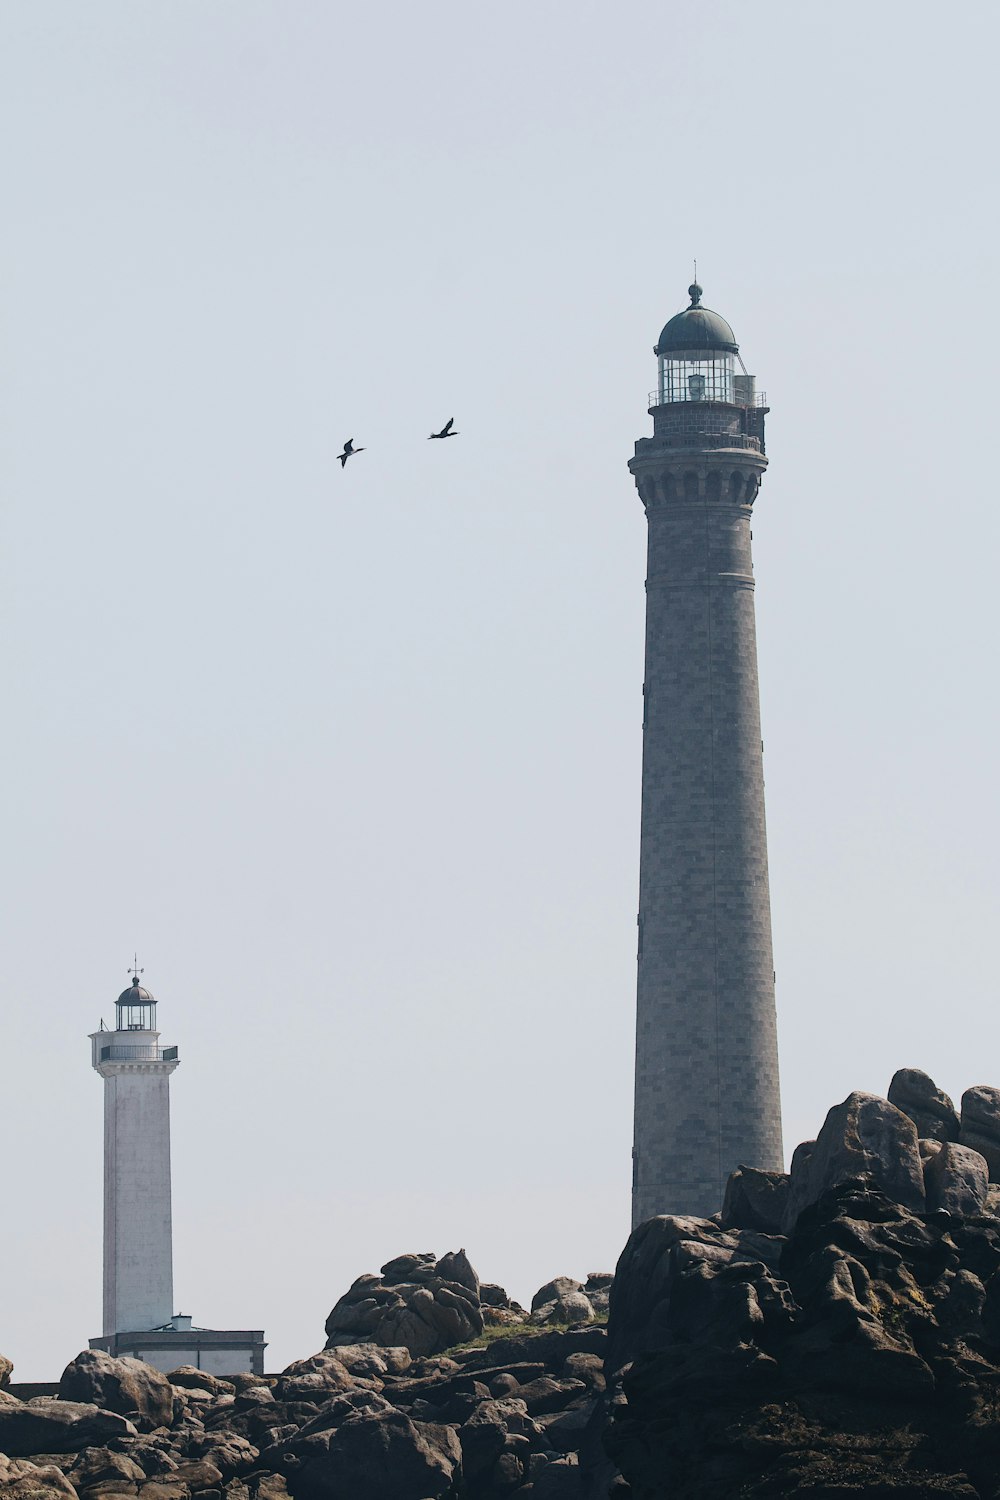 a couple of lighthouses on a rocky hill with birds flying around